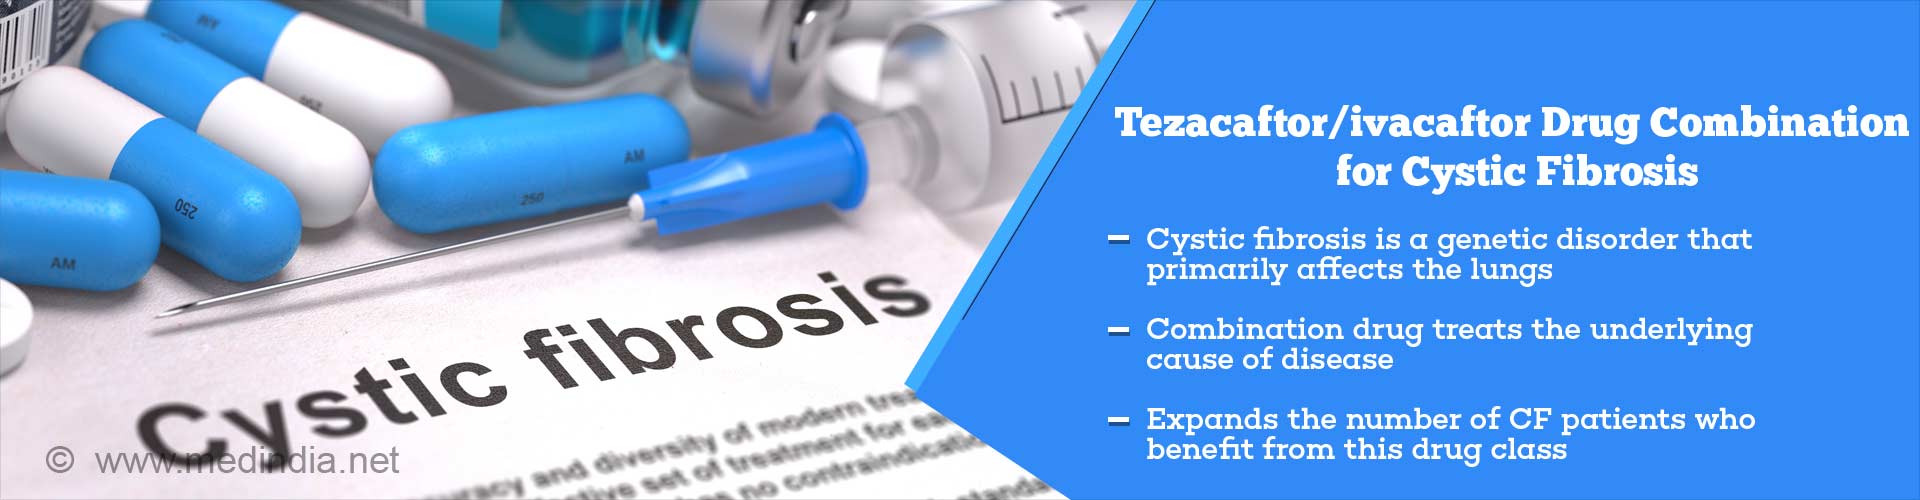 tezacaftor/ivacaftor drug combination for cystic fibrosis
- cystic fibrosis is a generic disorder that primarily affects the lungs
- Combination drug treats the underlying cause of disease
- Expands the number of CF patients who benefit from this drug class